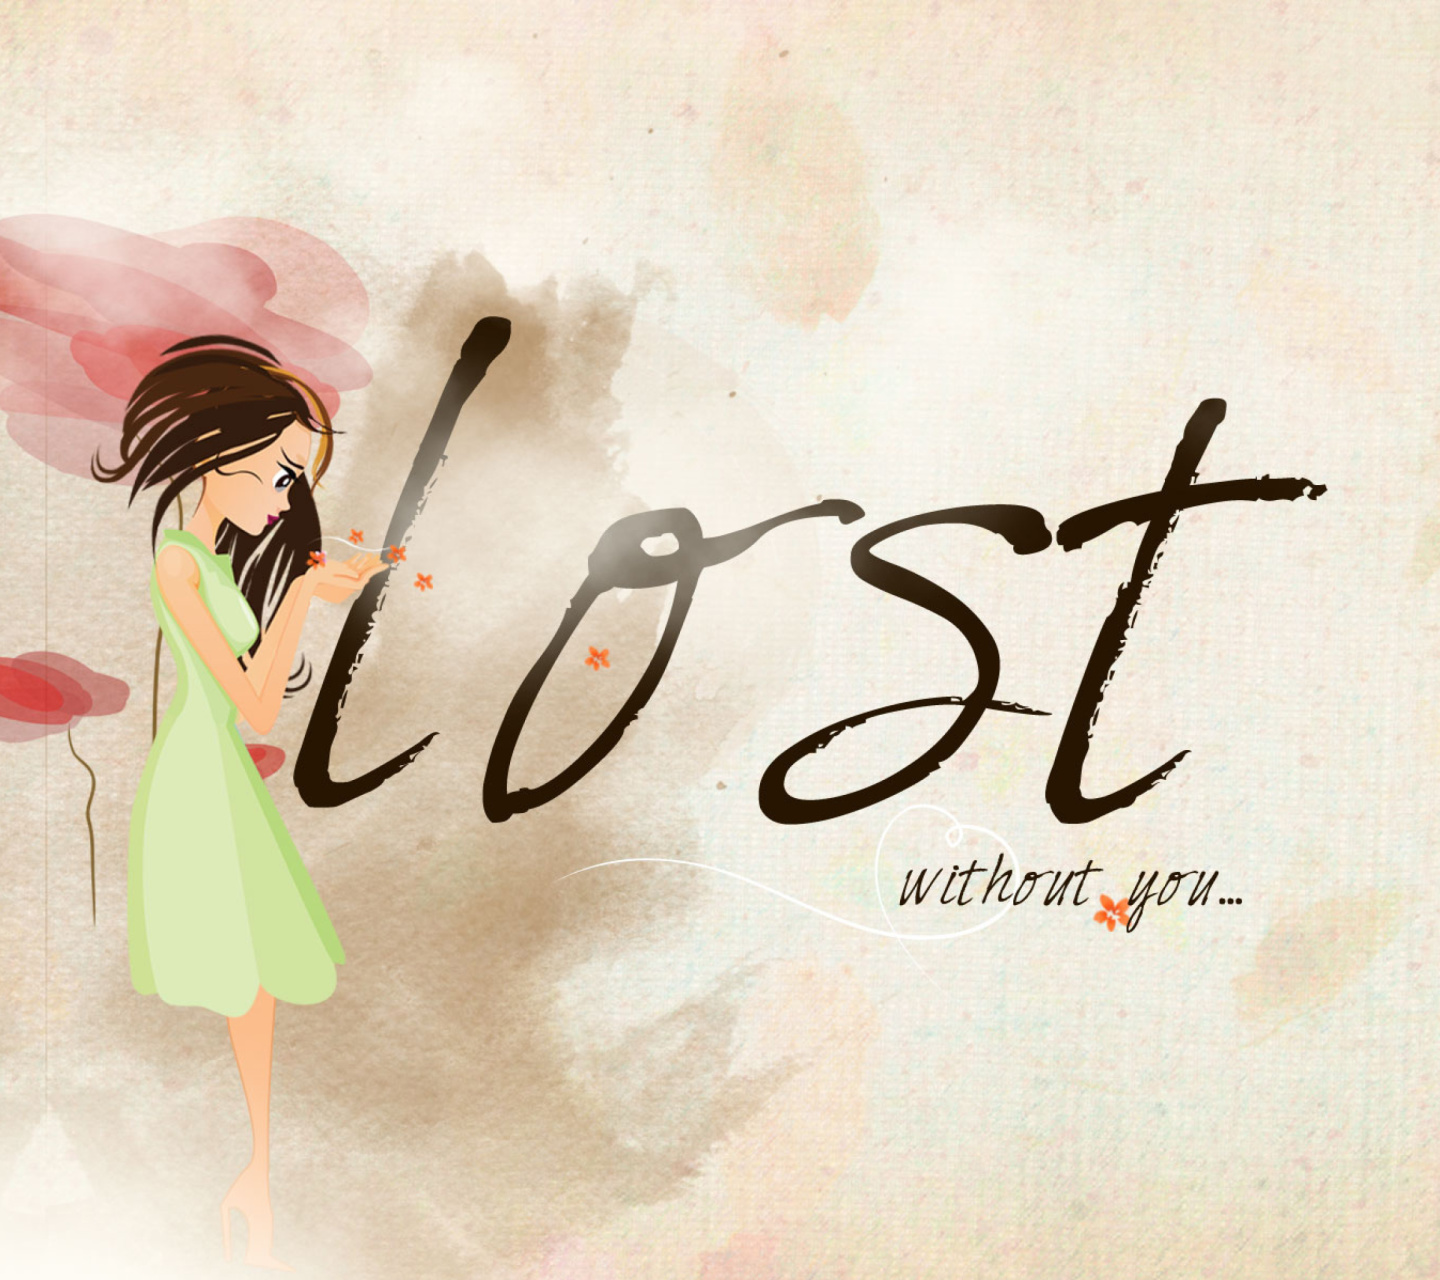 Das Lost Without You Wallpaper 1440x1280